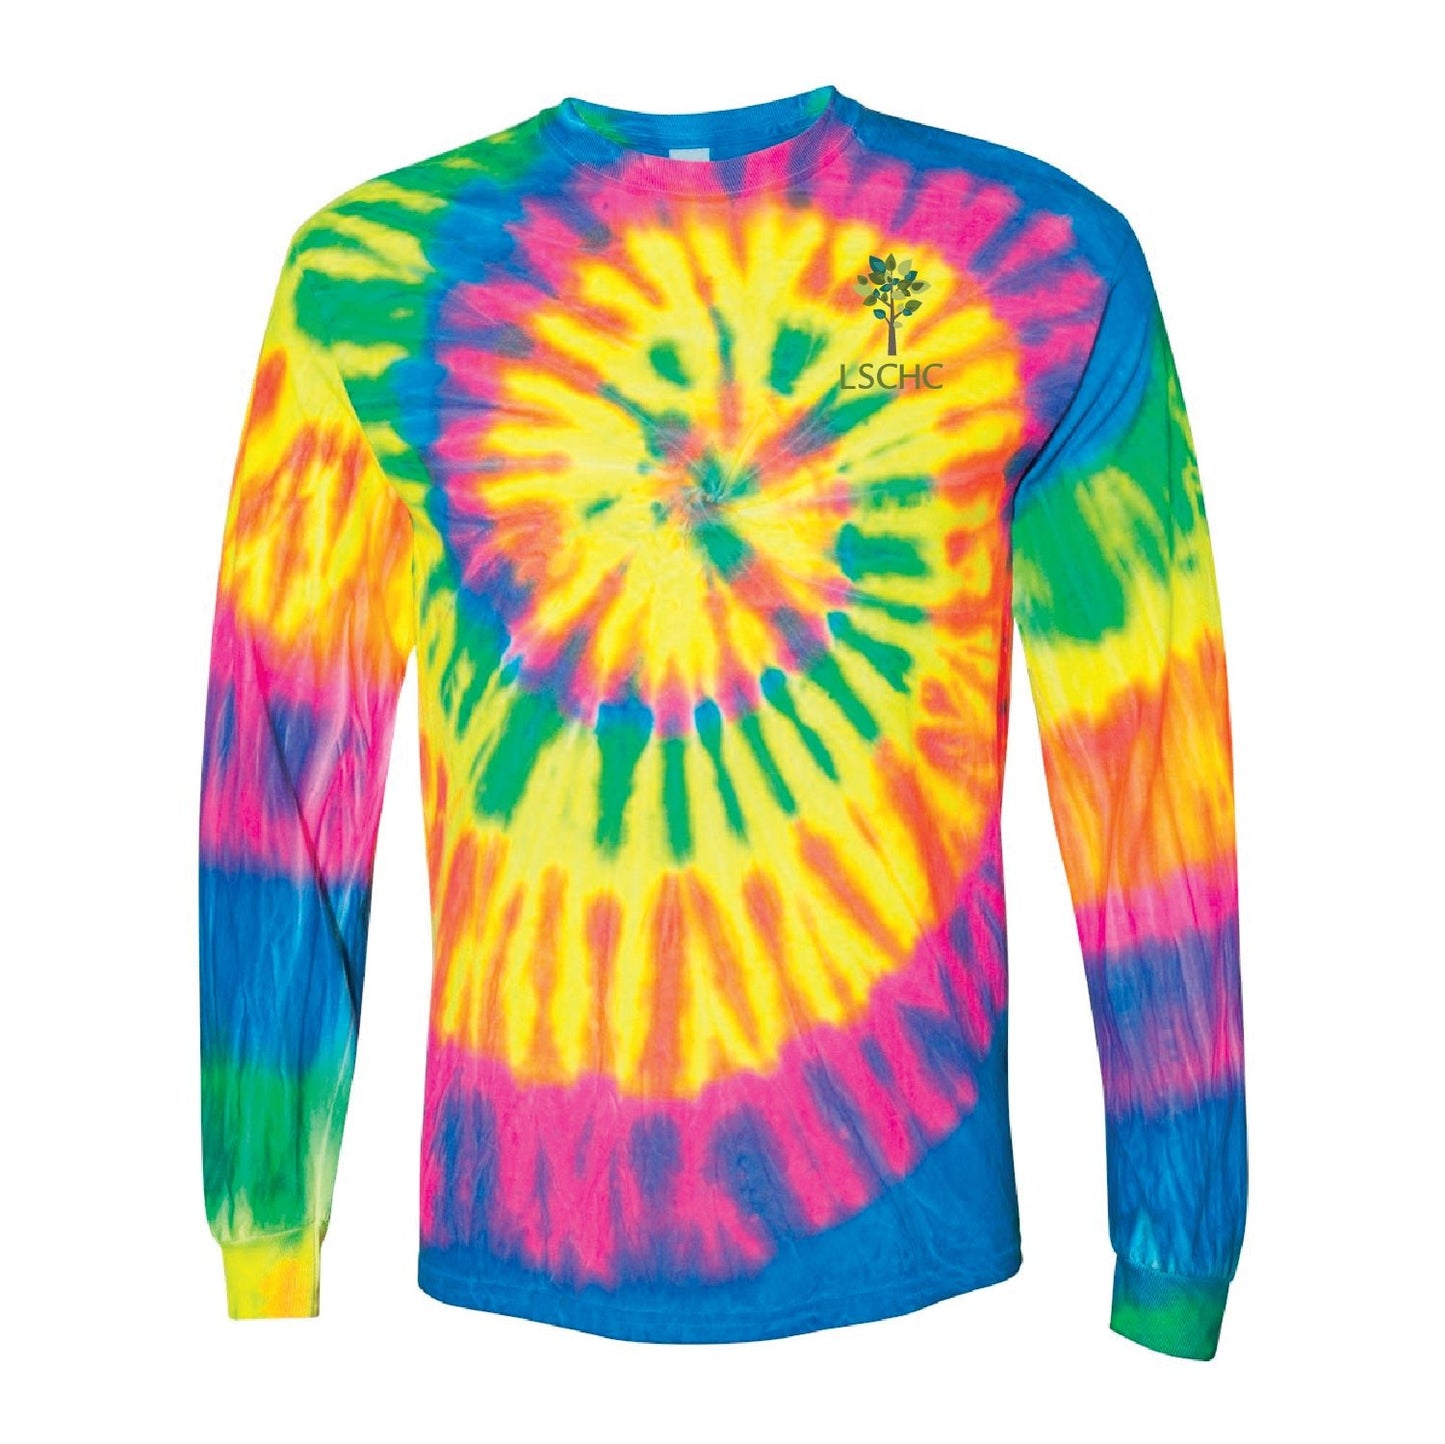 LSCHC Multi-Color Spiral Tie-Dyed Long Sleeve T-Shirt - DSP On Demand